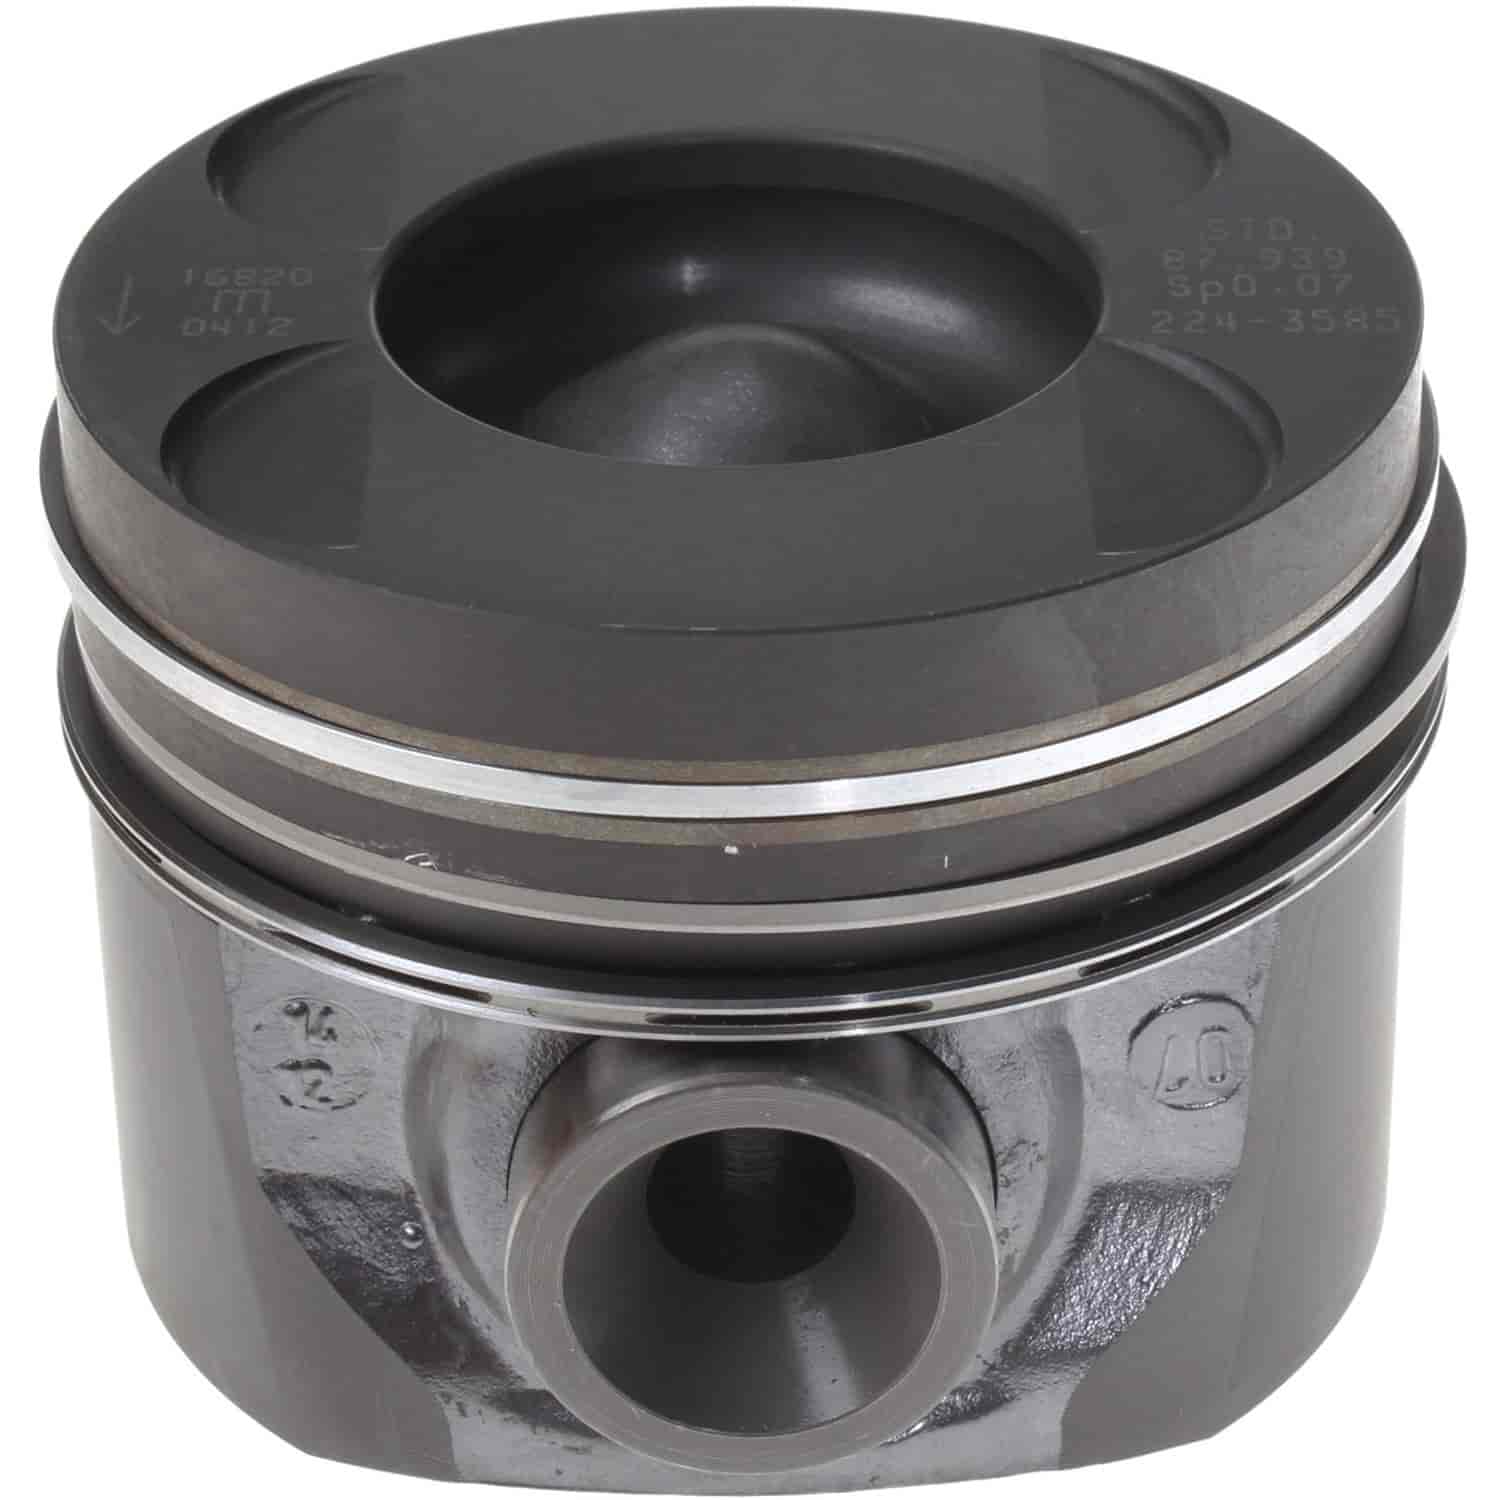 Piston Set With Rings 2004-2006 Mecedes-Benz OM647 L5 2.7L Diesel with 3.465" Bore (Standard)